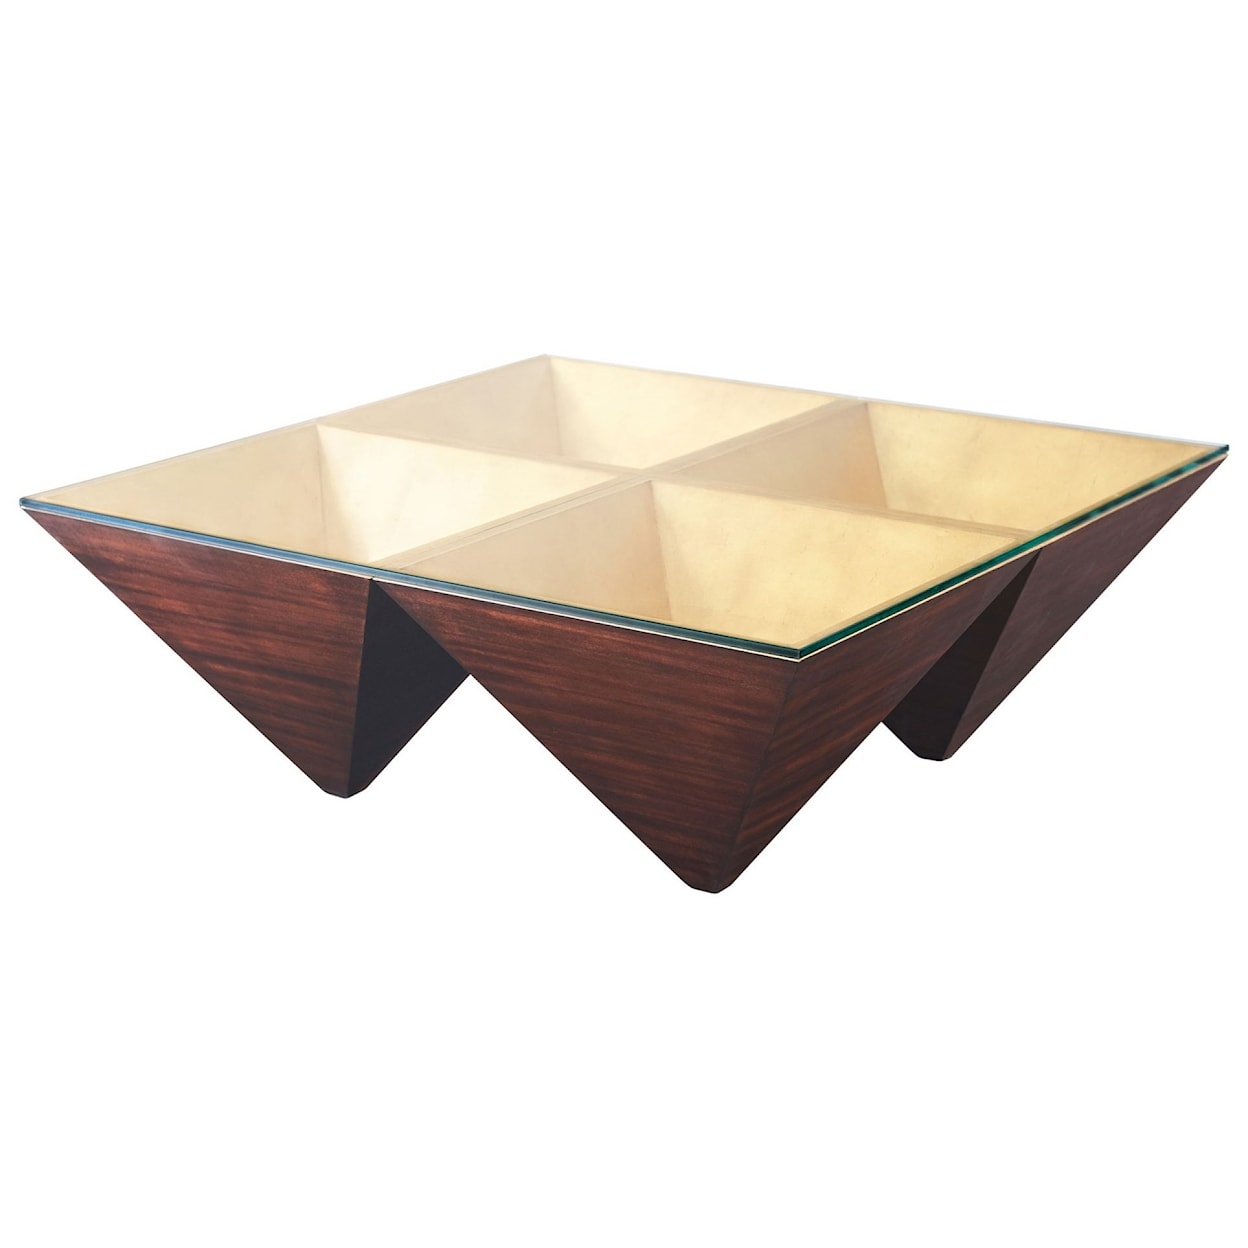 Theodore Alexander Vanucci Eclectics Pyramidal Points Cocktail Table